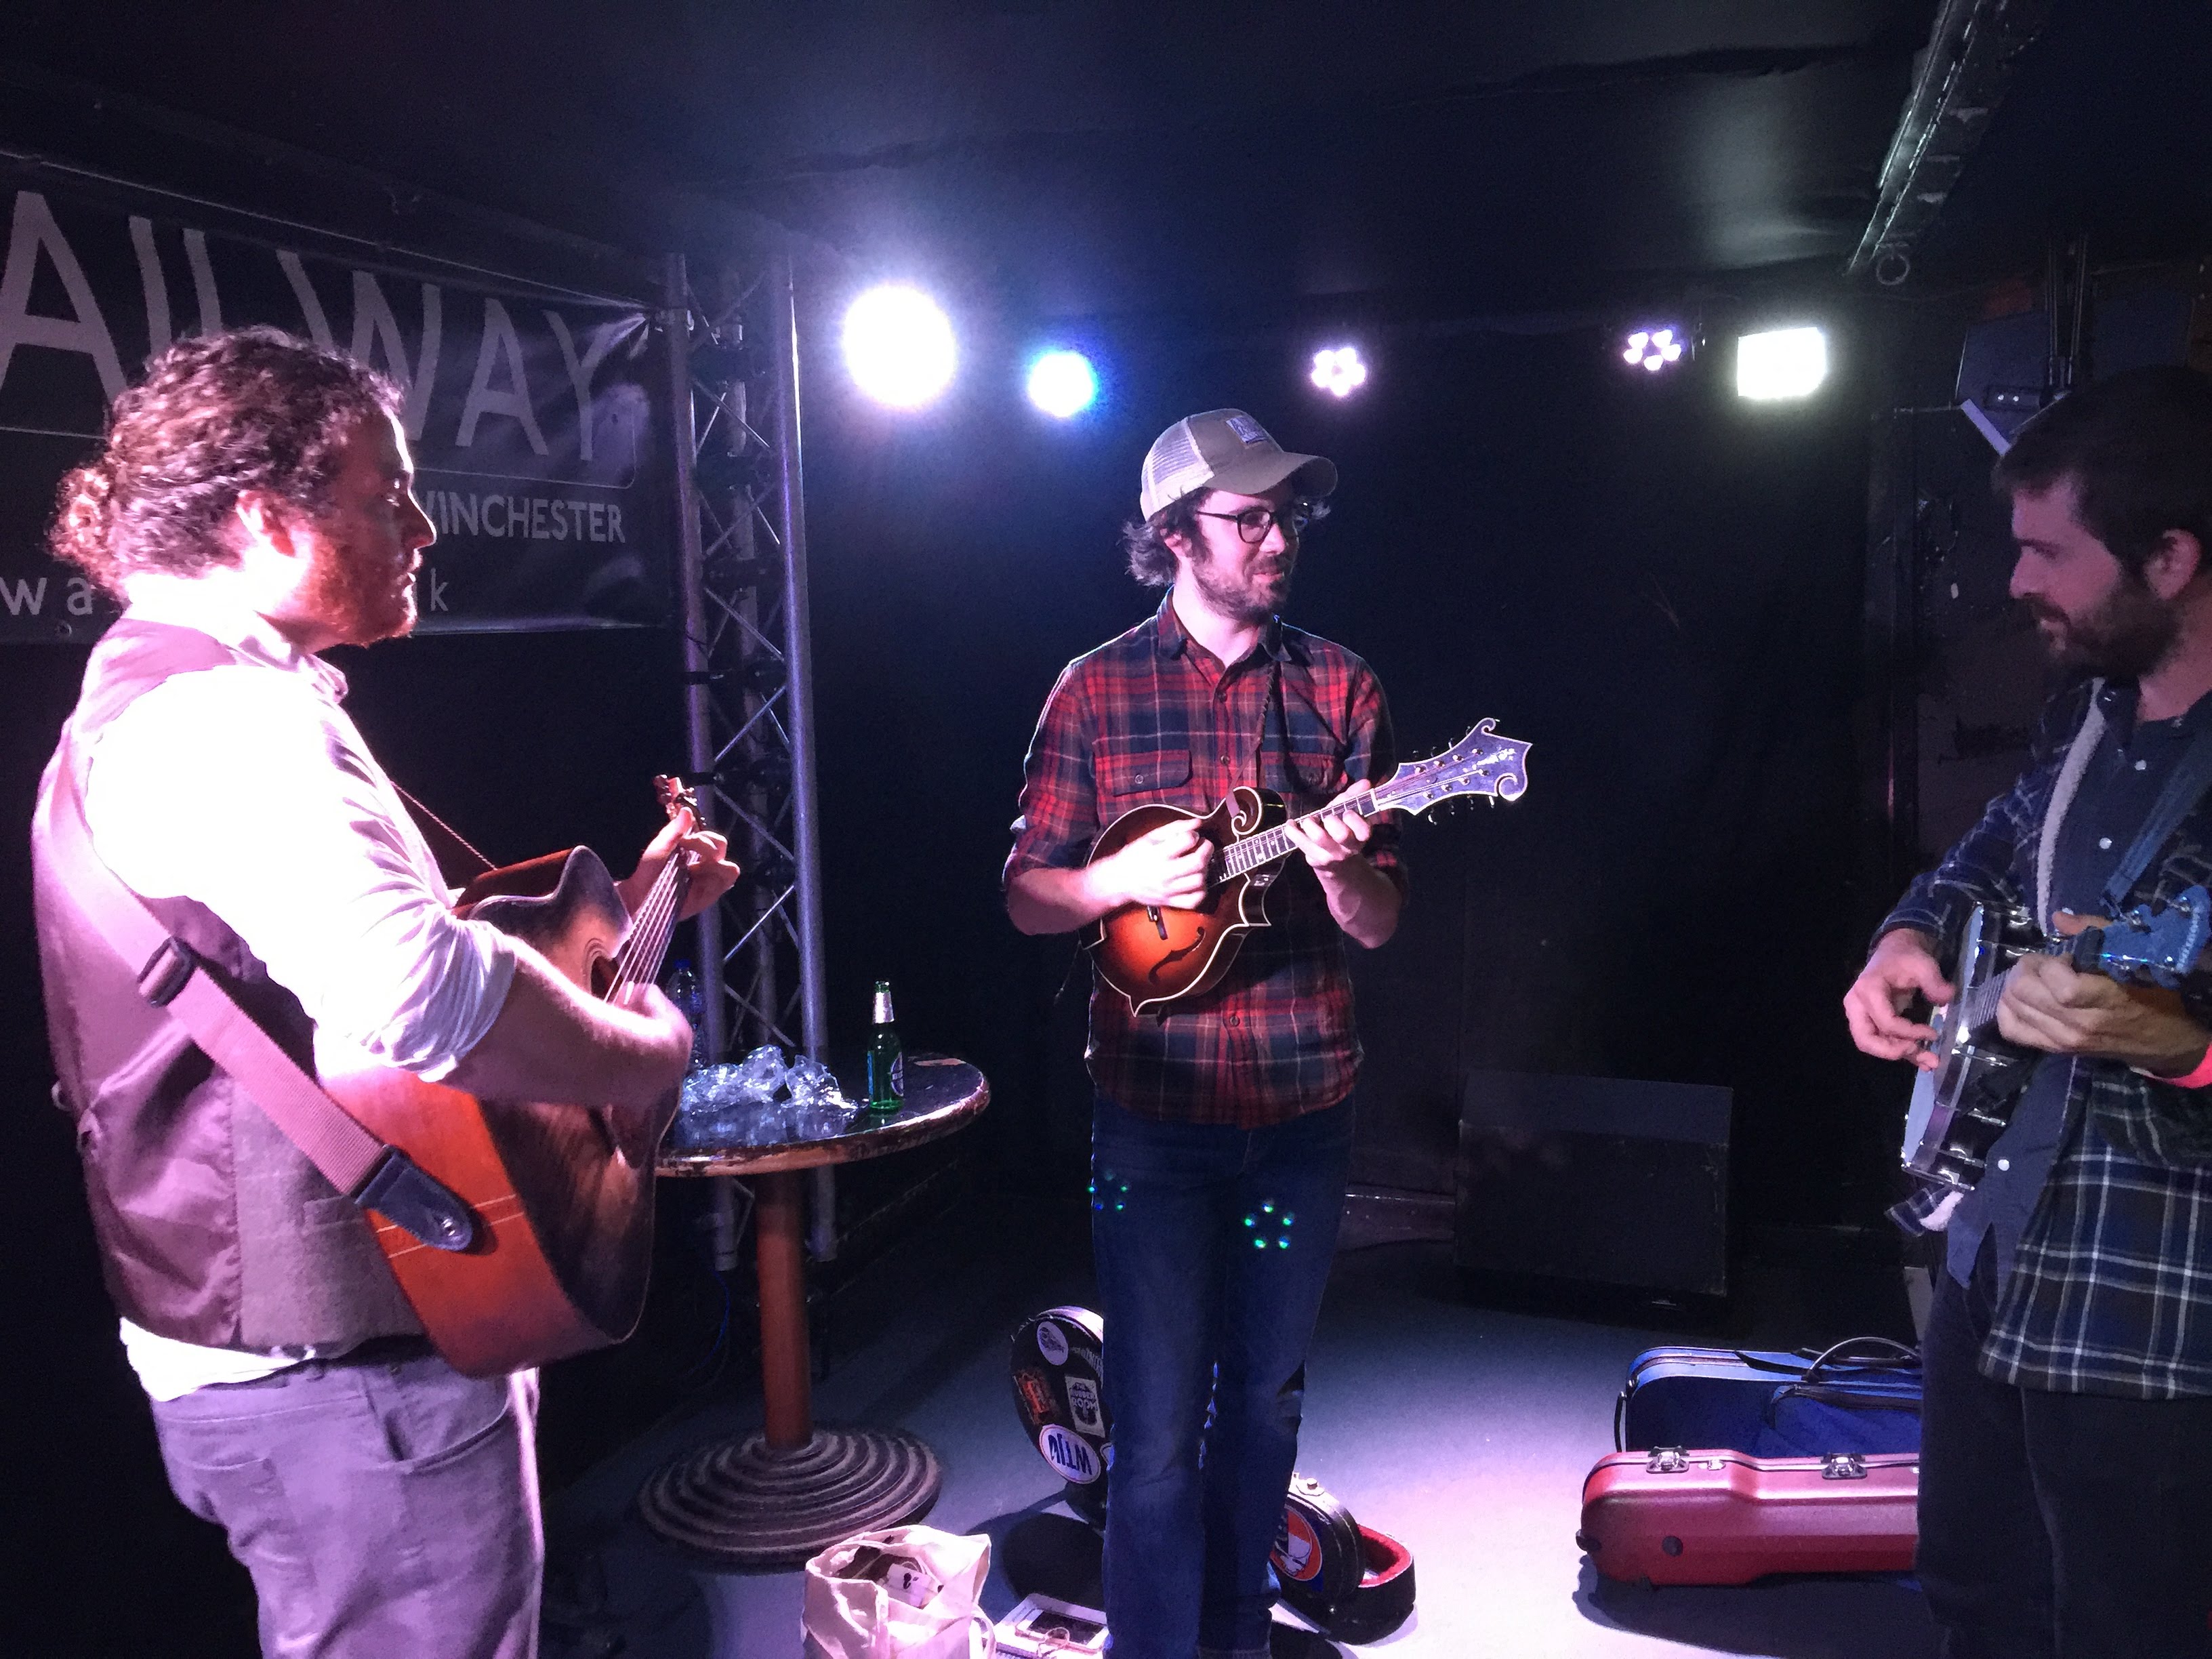 Charlie Jonas picking with Andrew Marlin and Josh Oliver of Watchhouse (Mandolin Orange) after opening for them in Winchester, UK